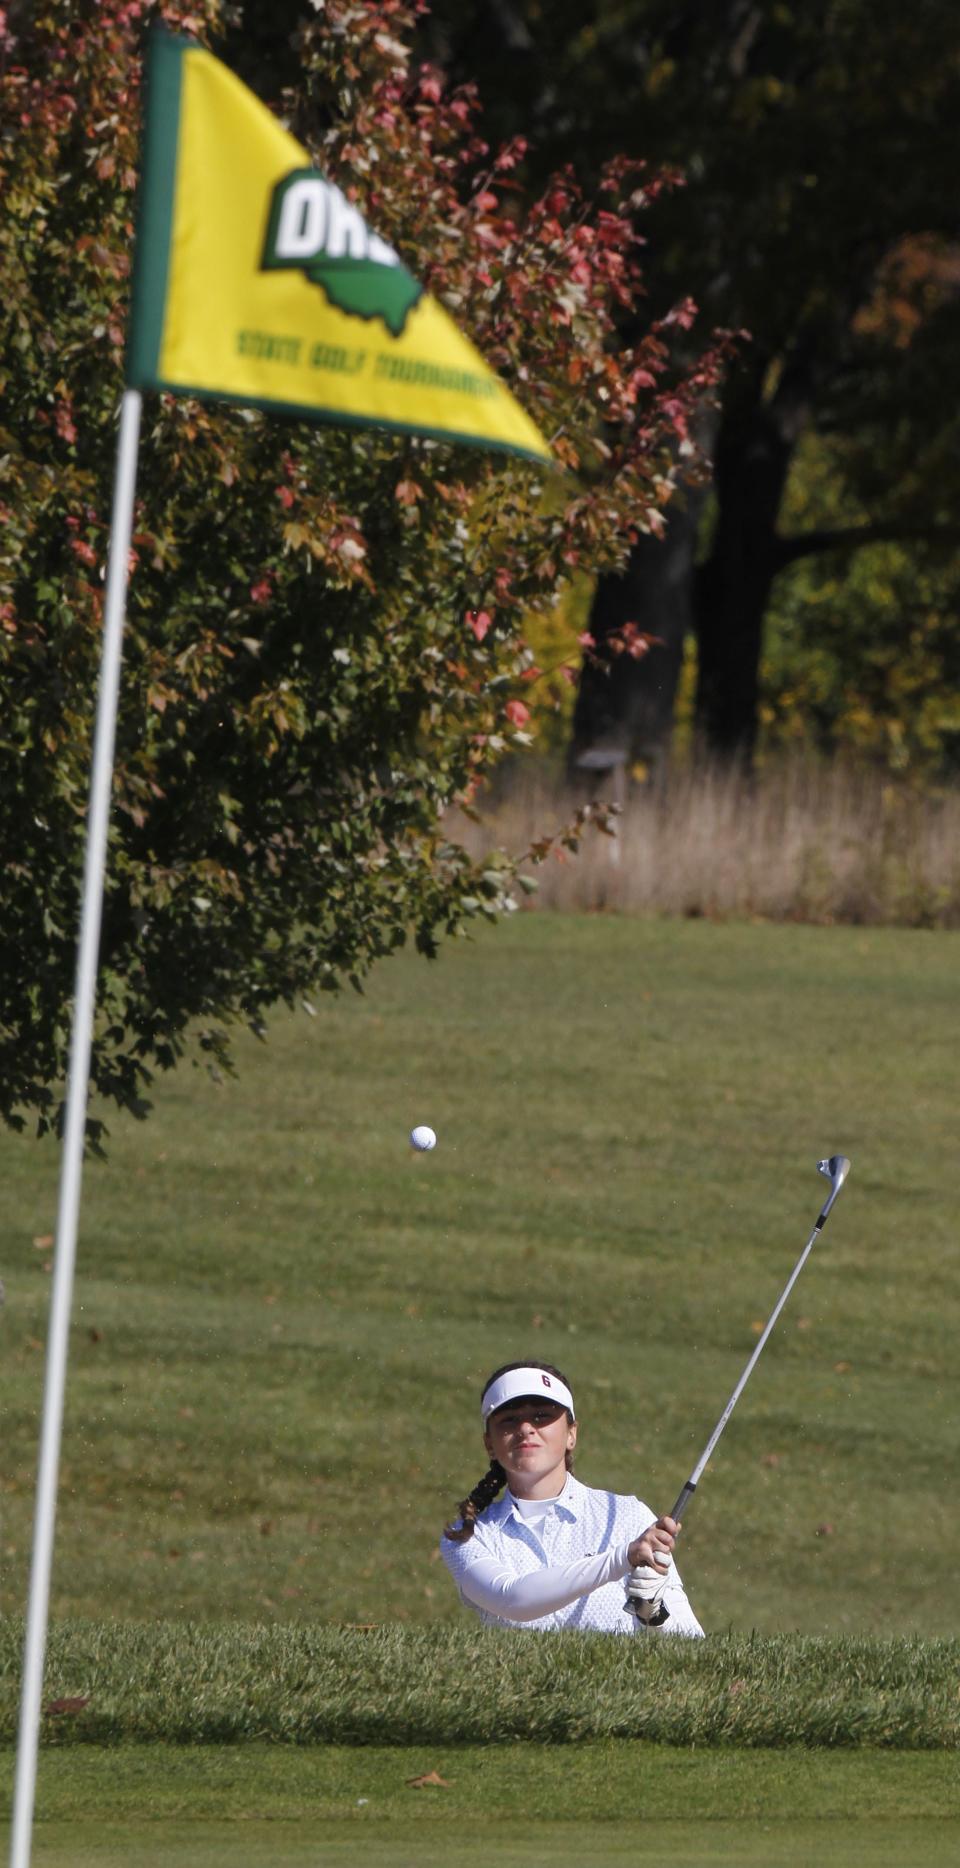 Garaway's Sammi Miller chips onto the green during the Girls Division II State Championships on Oct. 15 at the Ohio State Golf Club Gray Course.